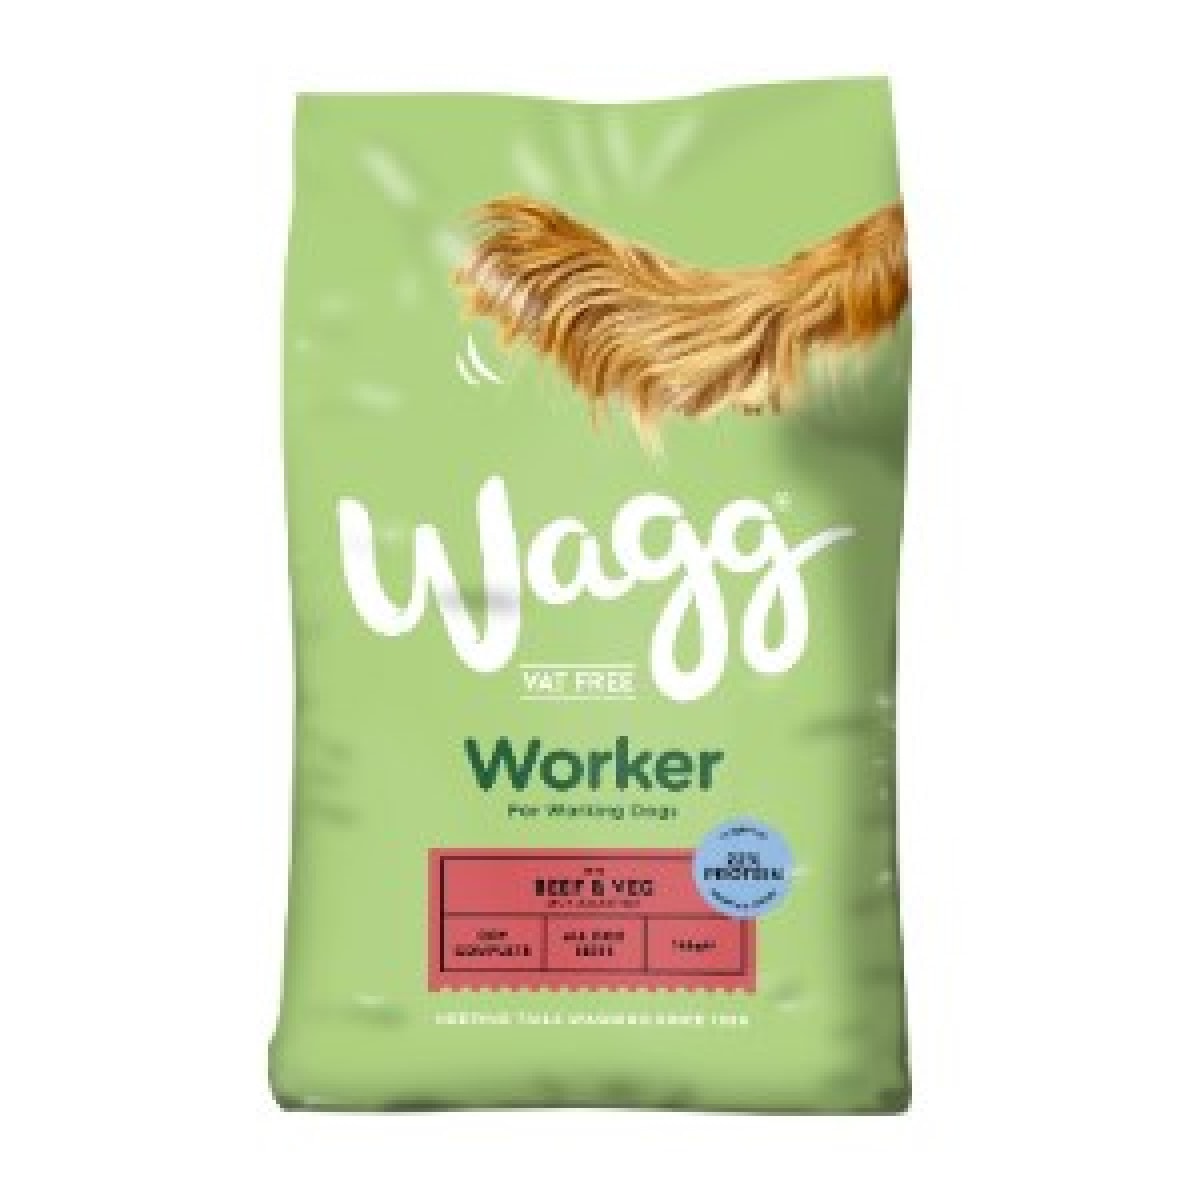 Wagg Worker Beef 2kg Product Image